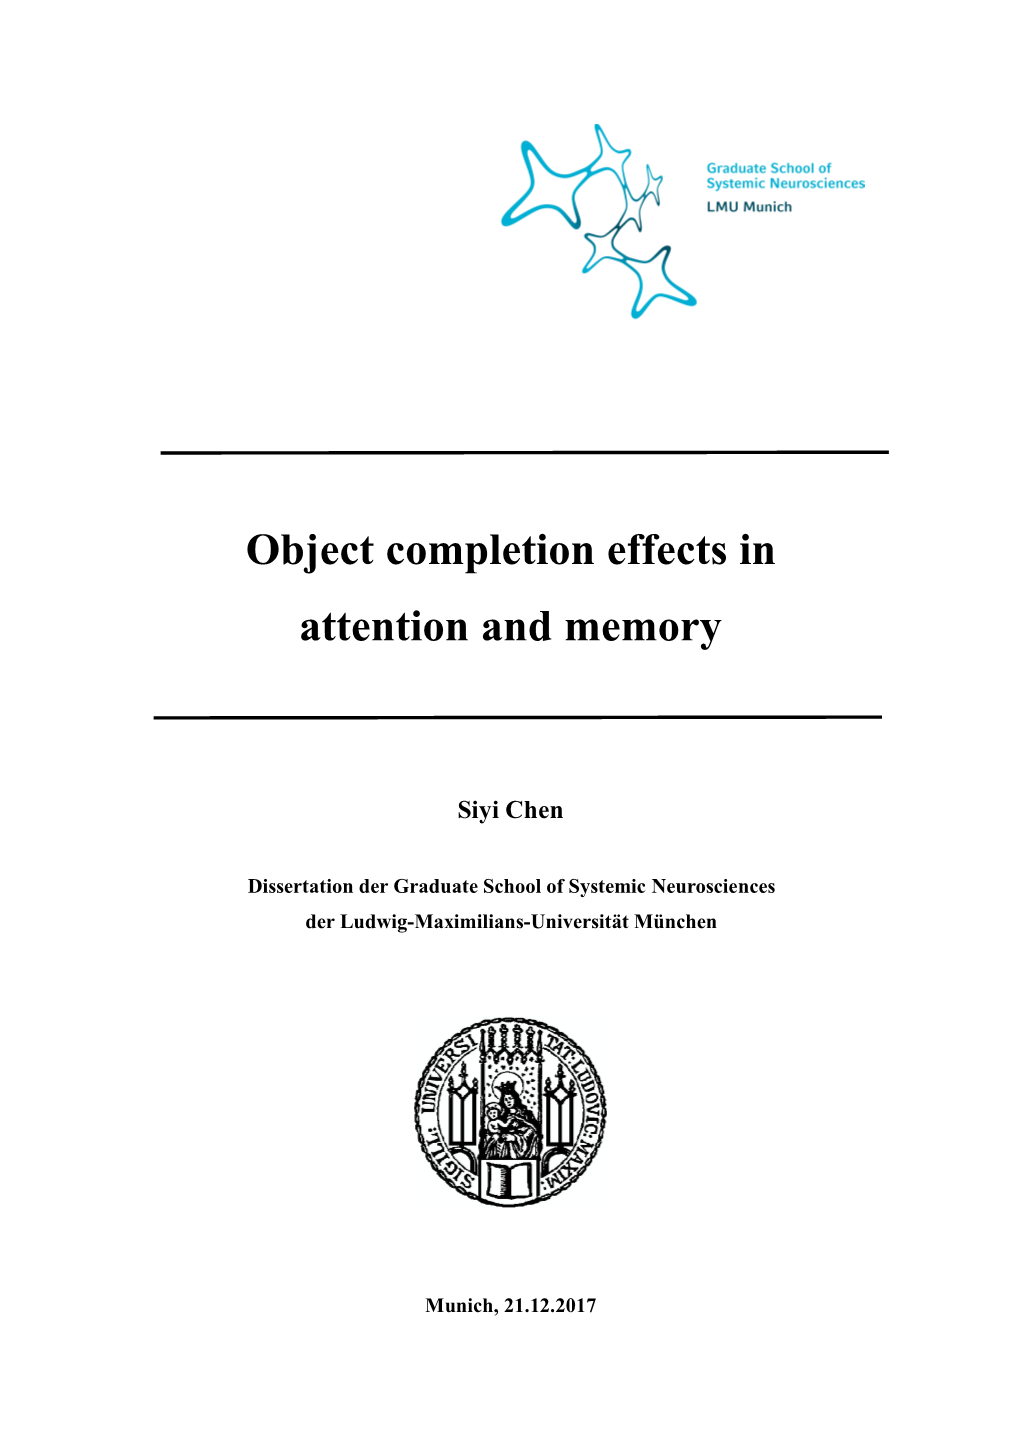 Object Completion Effects in Attention and Memory